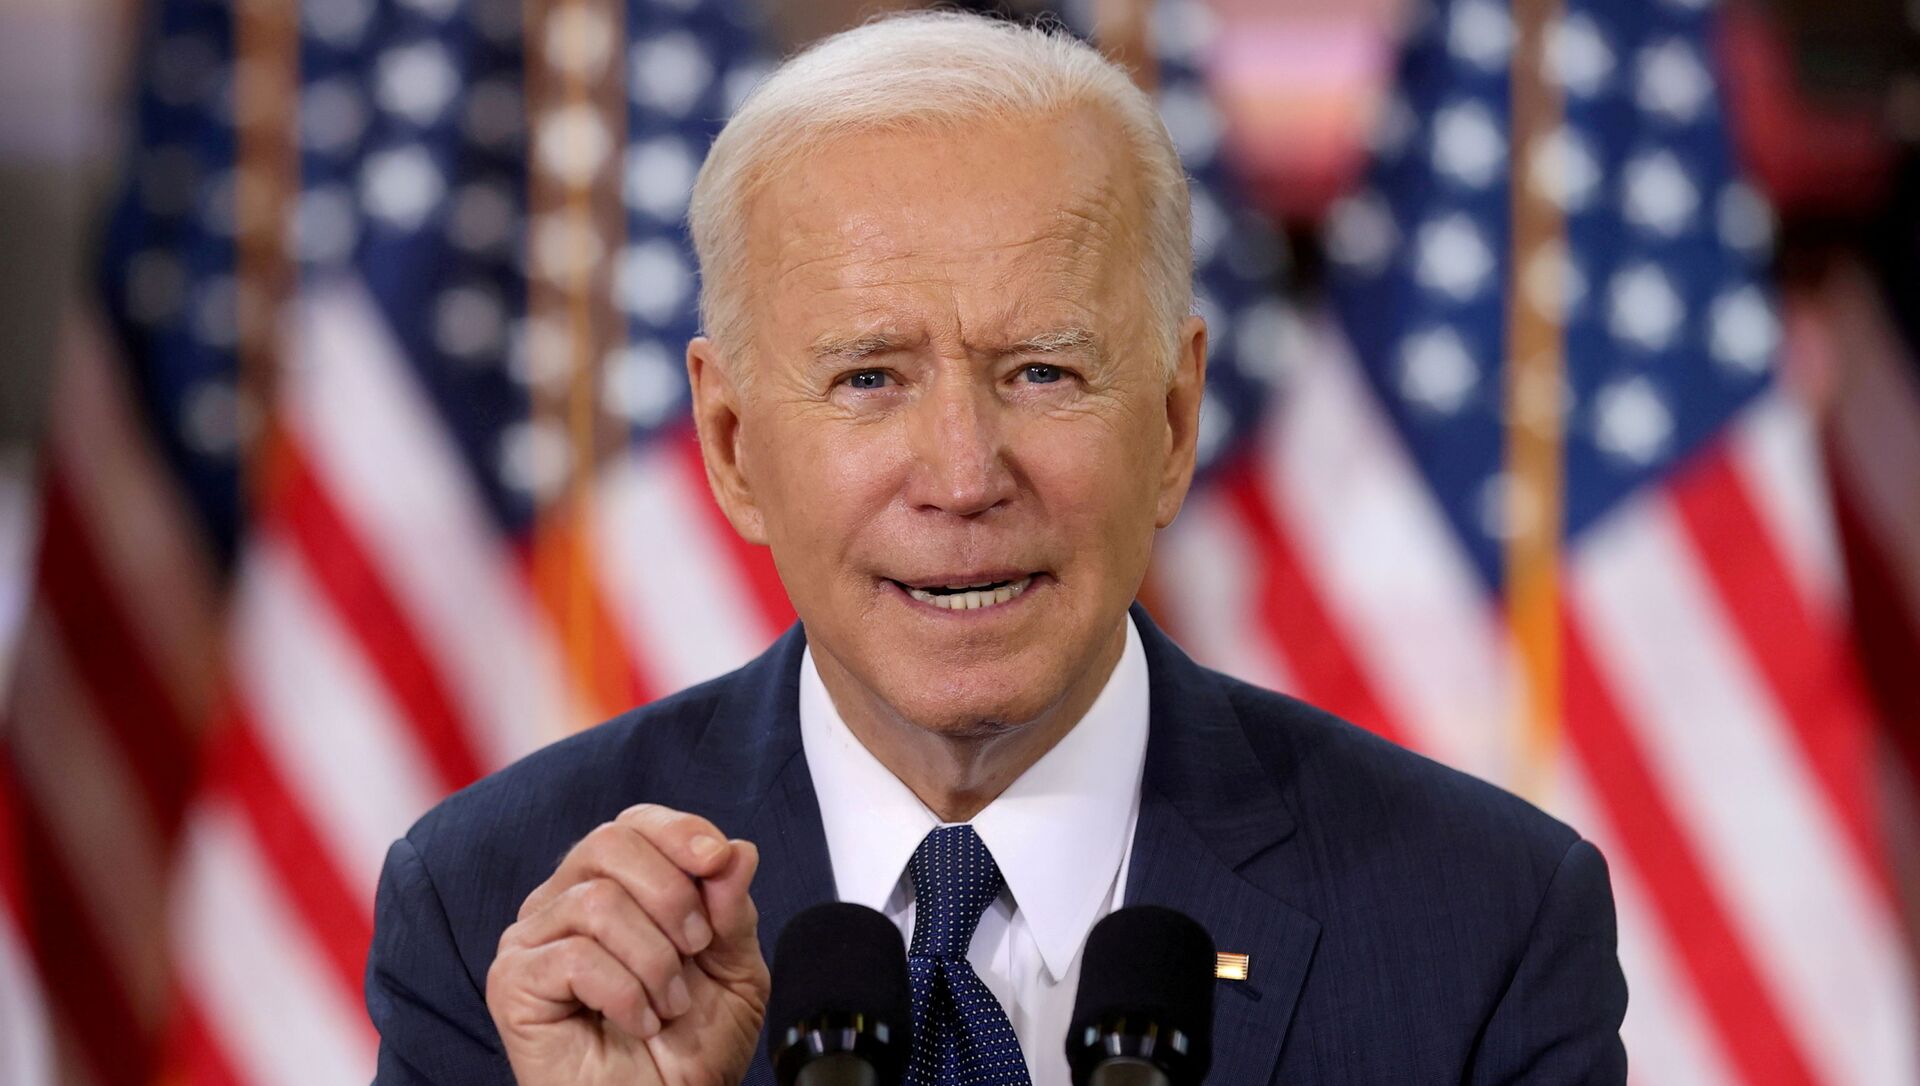 FILE PHOTO: U.S. President Joe Biden speaks about his infrastructure plan during an event to tout the plan at Carpenters Pittsburgh Training Center in Pittsburgh, Pennsylvania, 31 March 2021.  - Sputnik International, 1920, 15.05.2021